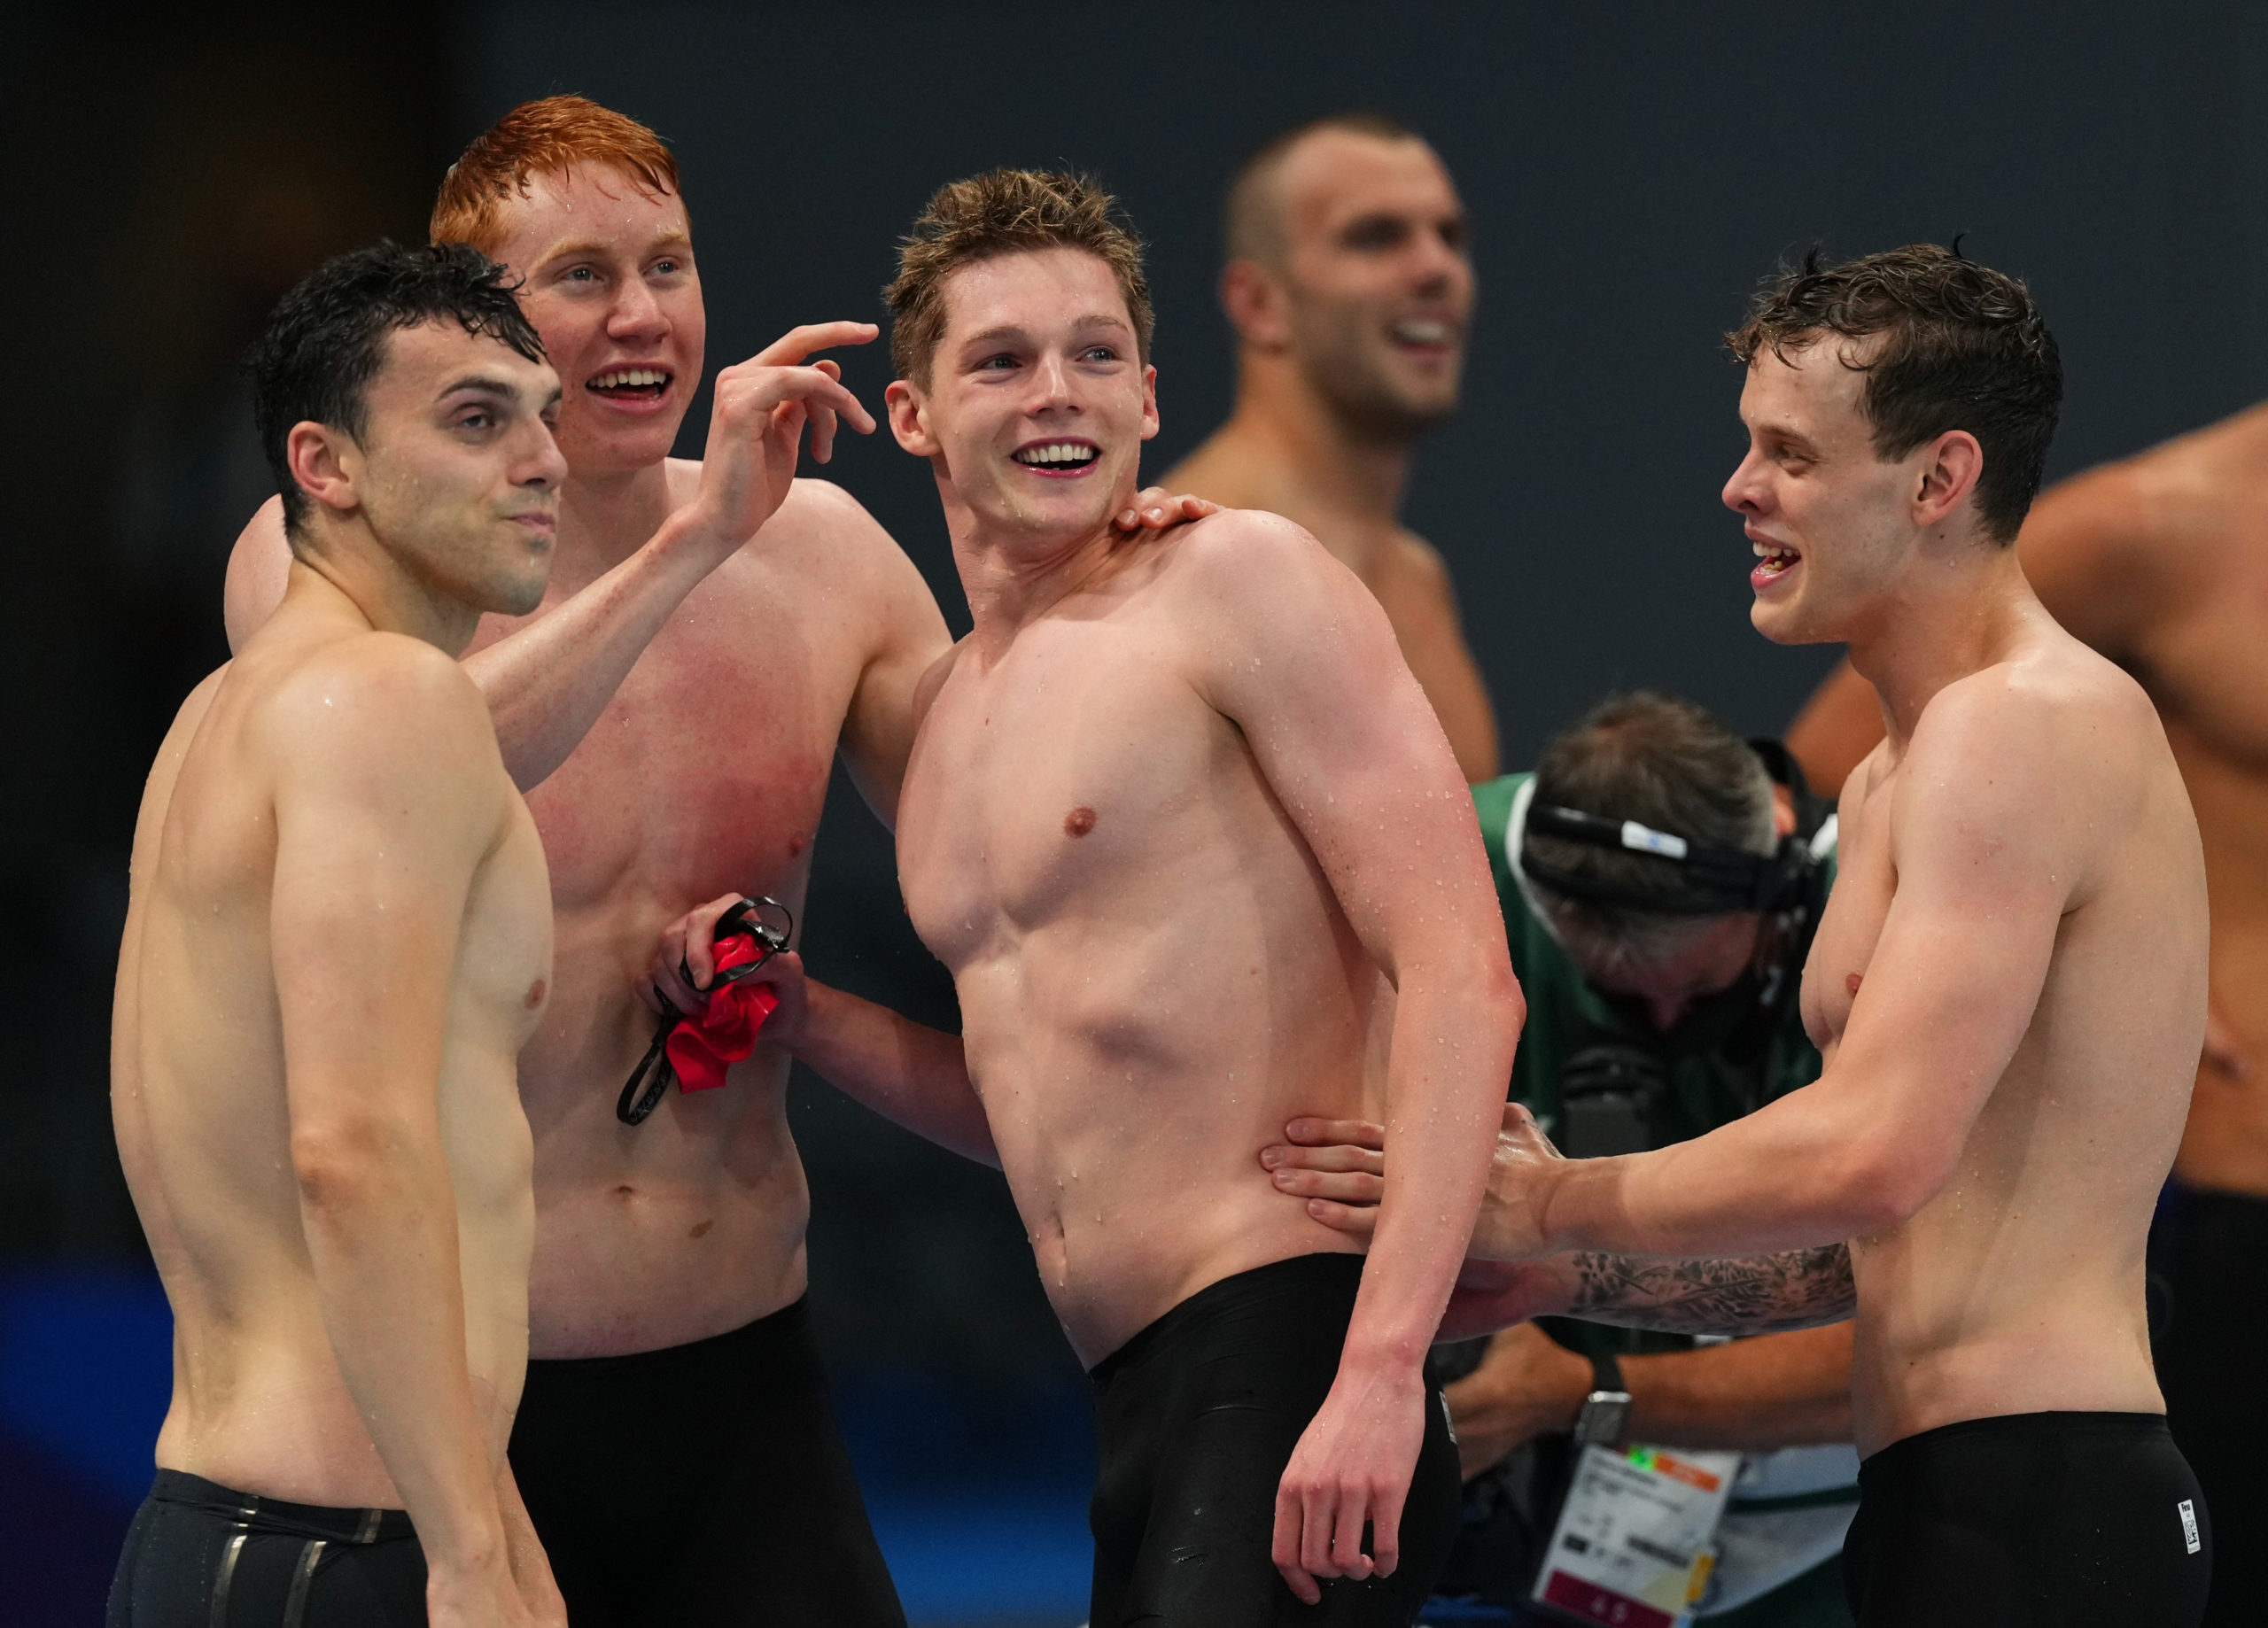 Tokyo 2020 Olympics - Swimming - Men's 4 x 200m Freestyle Relay - Medal Ceremony - Tokyo Aquatics Centre - Tokyo, Japan - July 28, 2021. Tom Dean of Britain, James Guy of Britain, Matthew Richards of Britain and Duncan Scott of Britain react after winning 